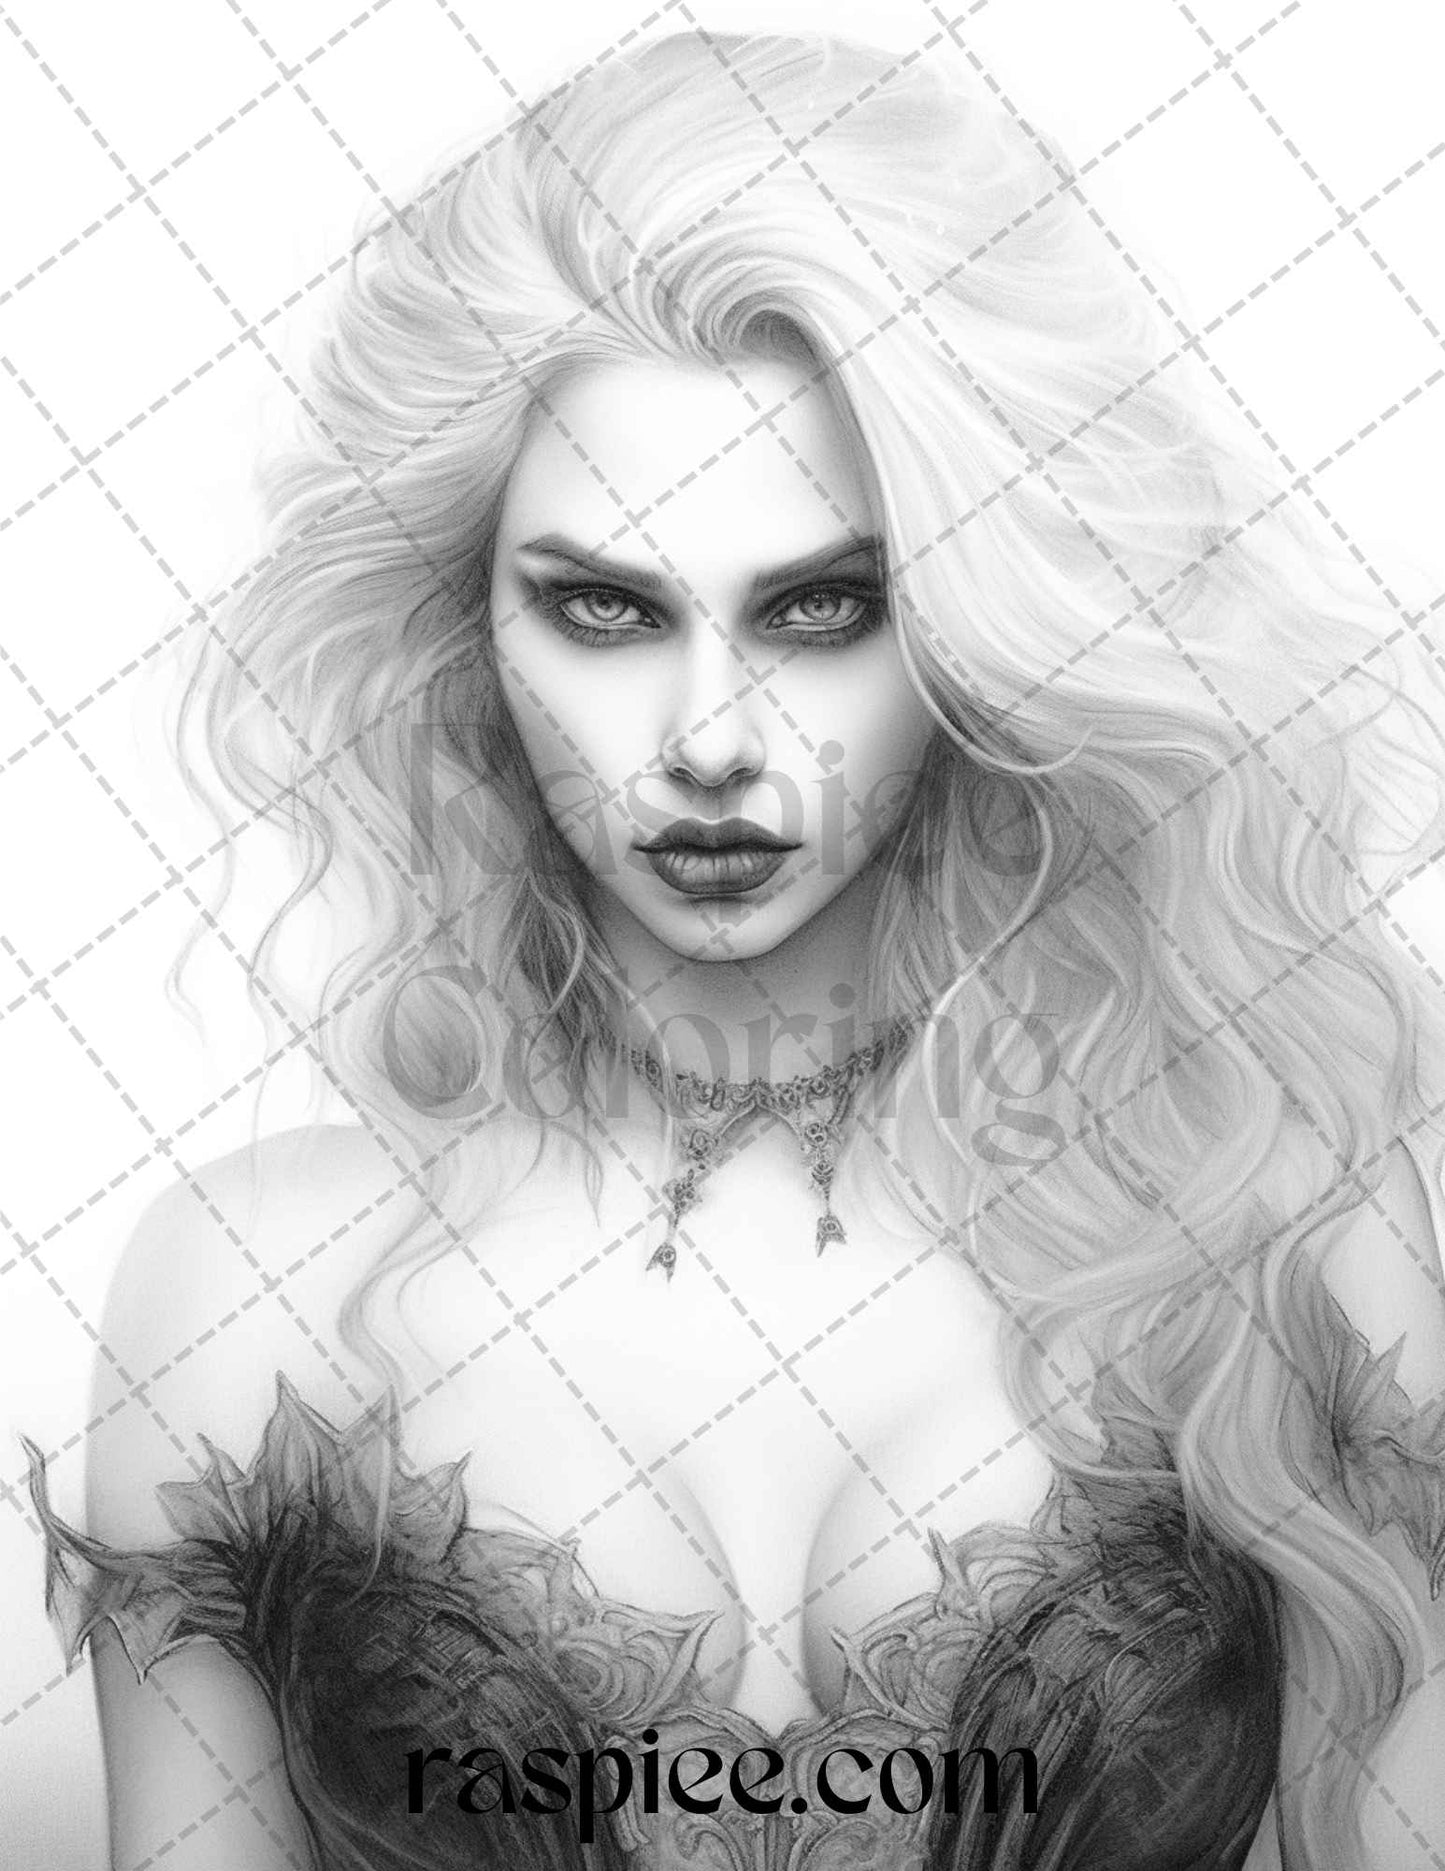 Bewitching Vampires Grayscale Coloring Pages Printable for Adults, PDF File Instant Download - raspiee